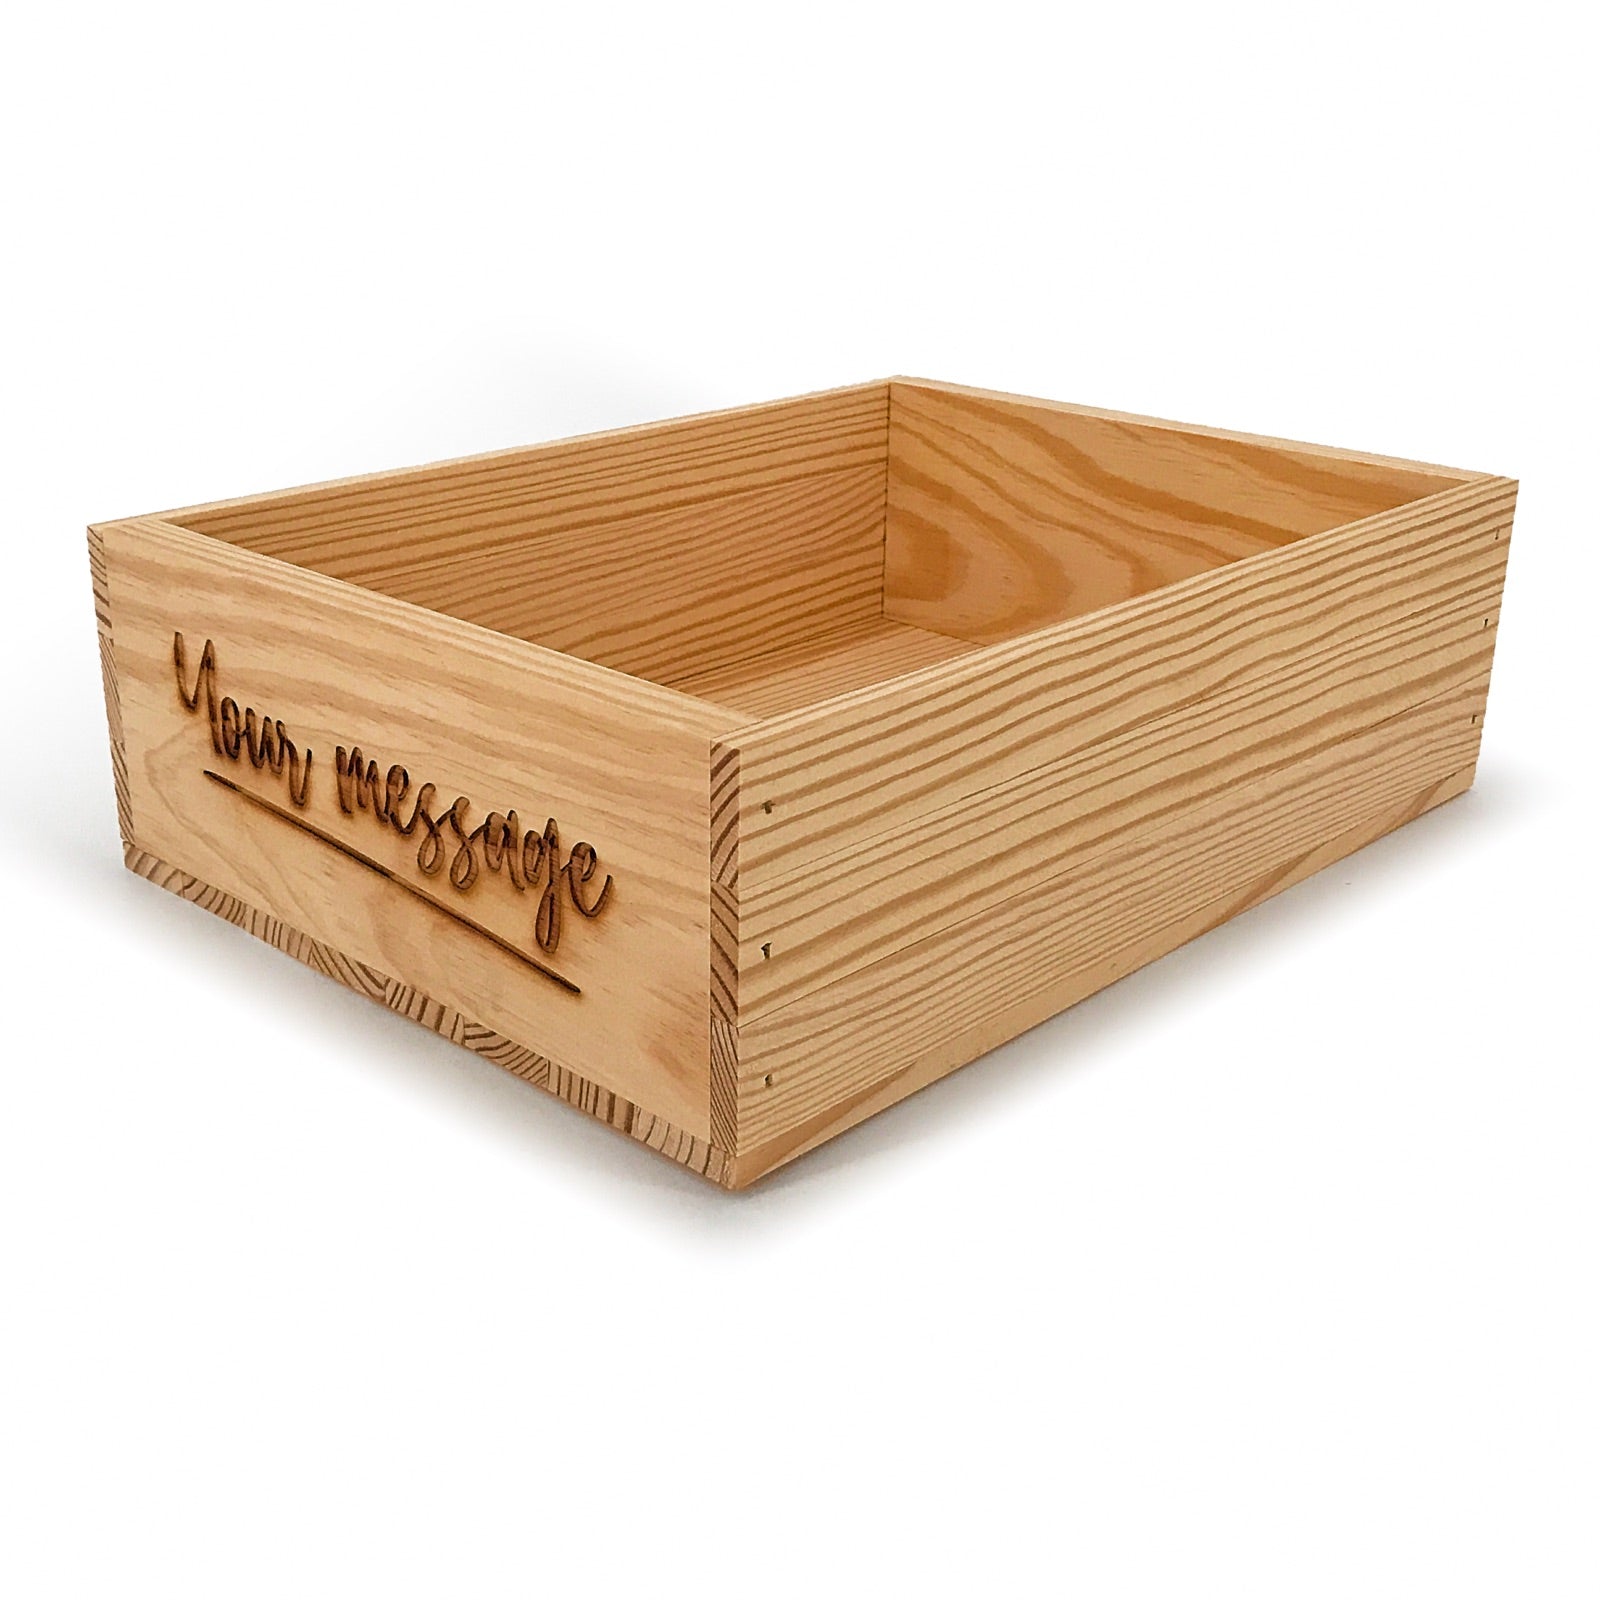 Small wooden crate with custom message 14x10x4.25, 6-B2-14.375-10.78125-4.3125-ST-NW-NL, 12-B2-14.375-10.78125-4.3125-ST-NW-NL, 24-B2-14.375-10.78125-4.3125-ST-NW-NL, 48-B2-14.375-10.78125-4.3125-ST-NW-NL, 96-B2-14.375-10.78125-4.3125-ST-NW-NL